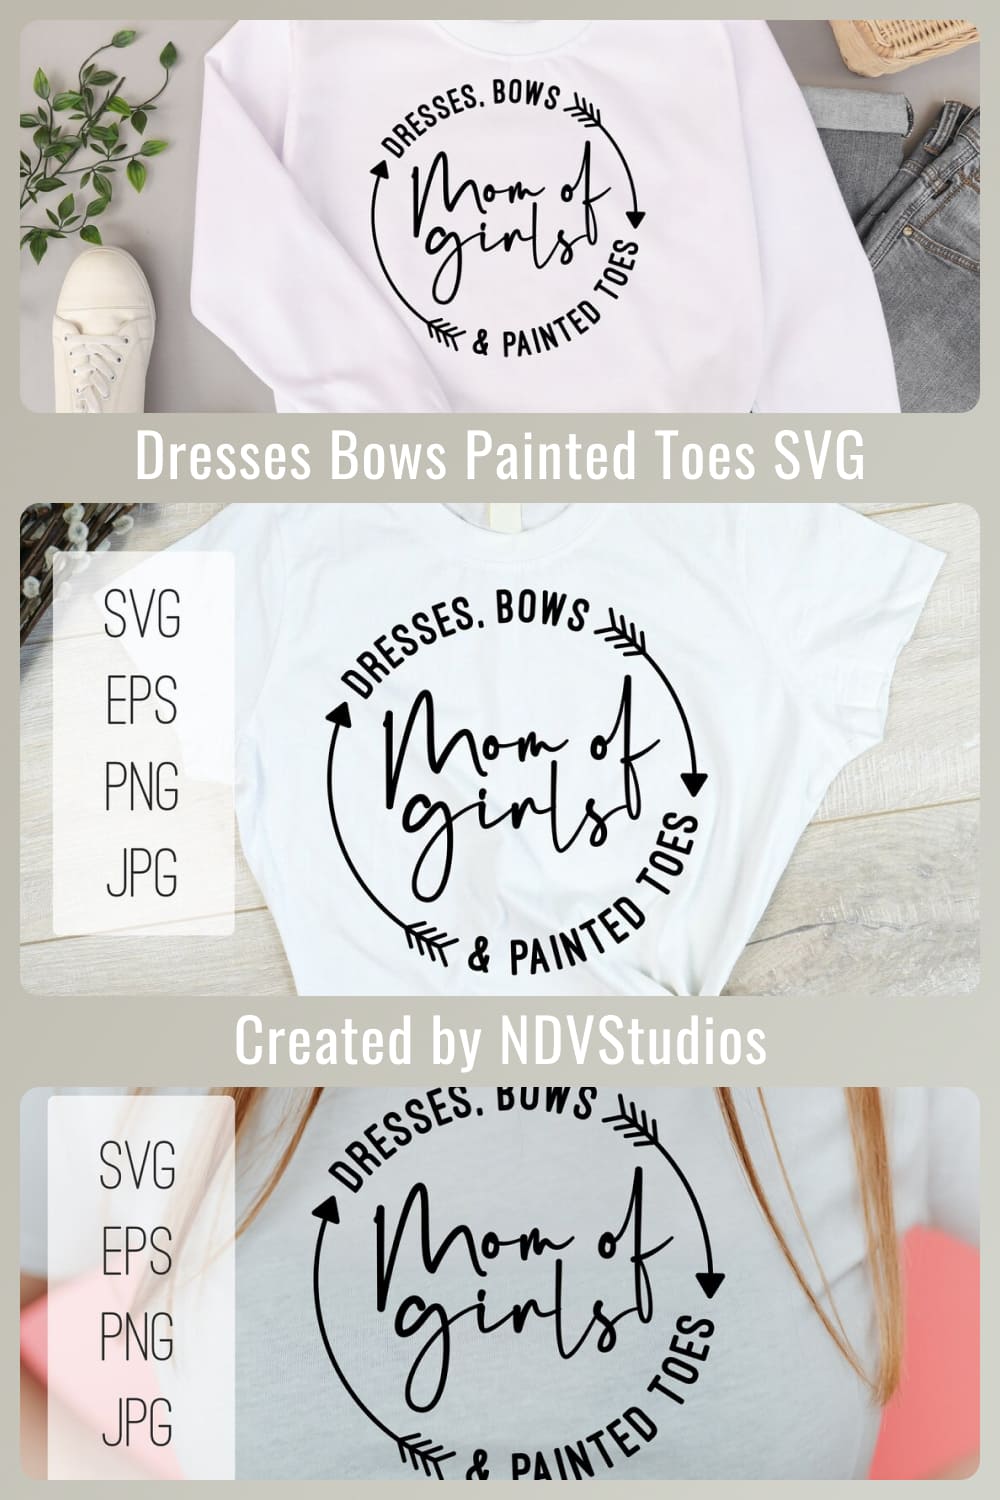 Dresses Bows Painted Toes SVG.